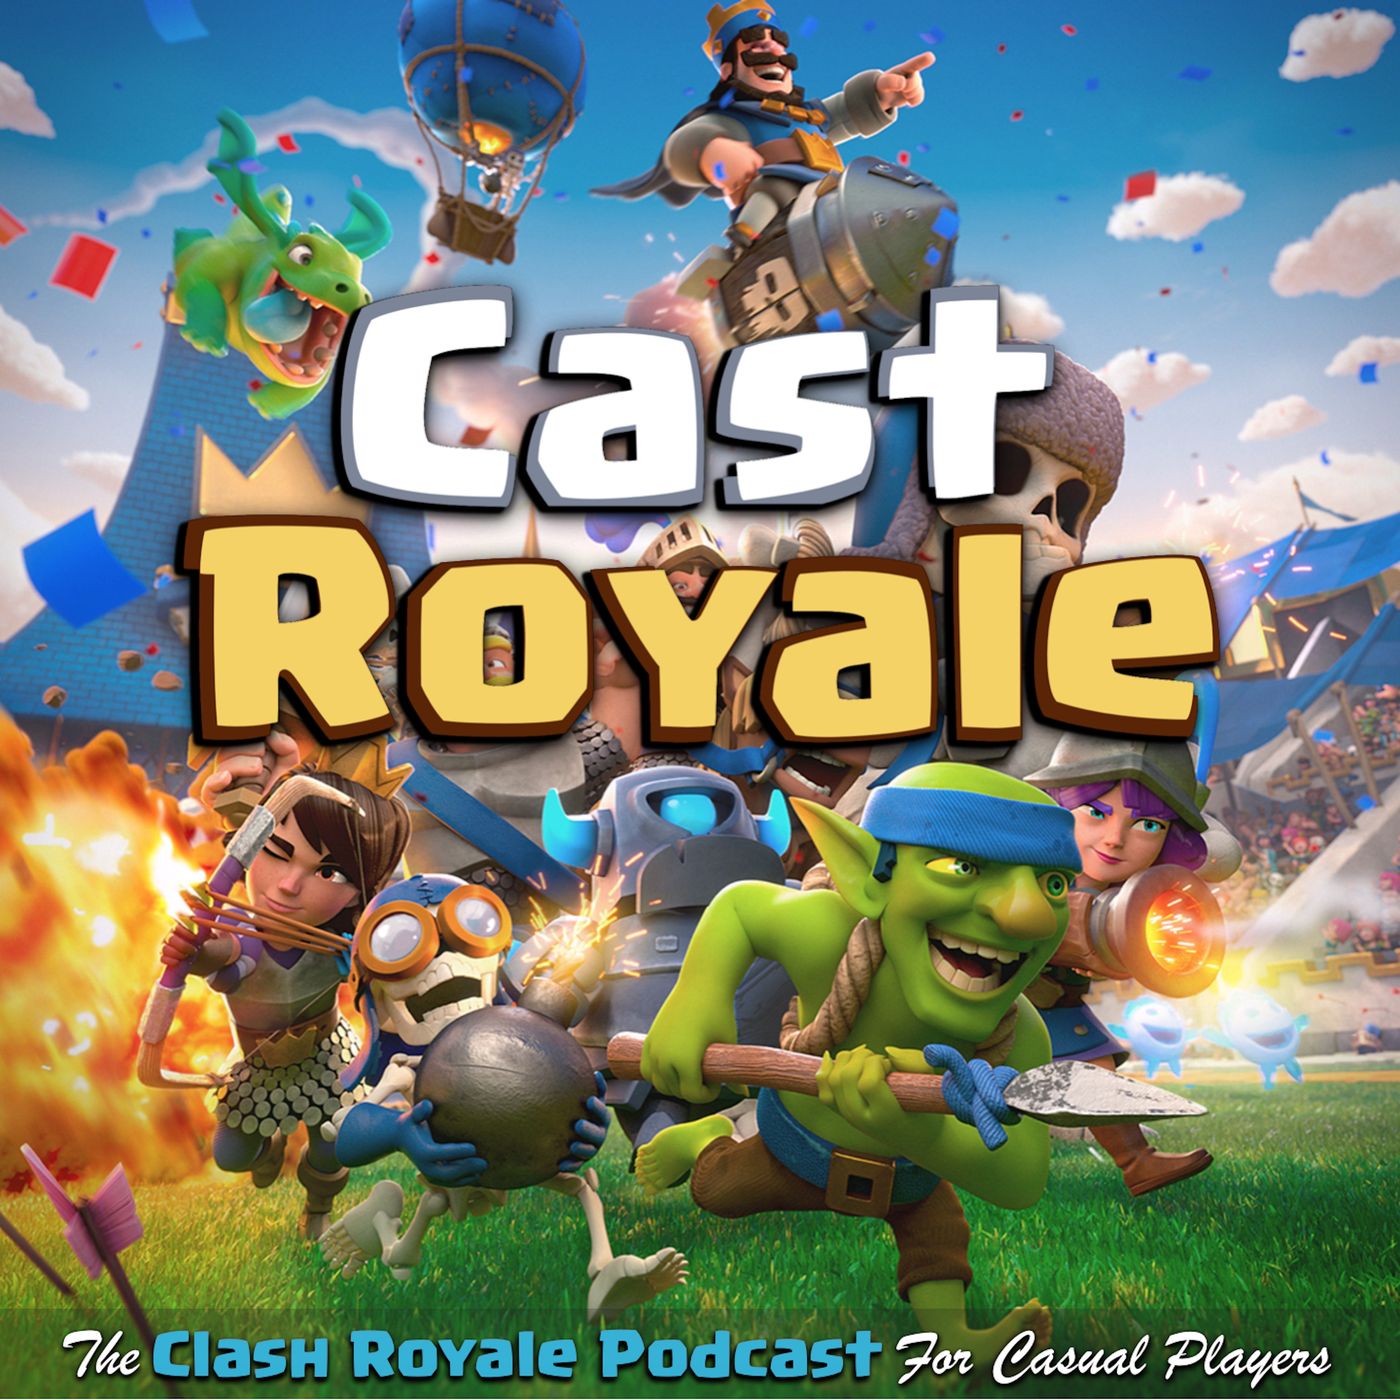 Cast Royale - The Clash Royale Podcast For Casual Players | A Bi-Weekly Radio Show on the Supercell